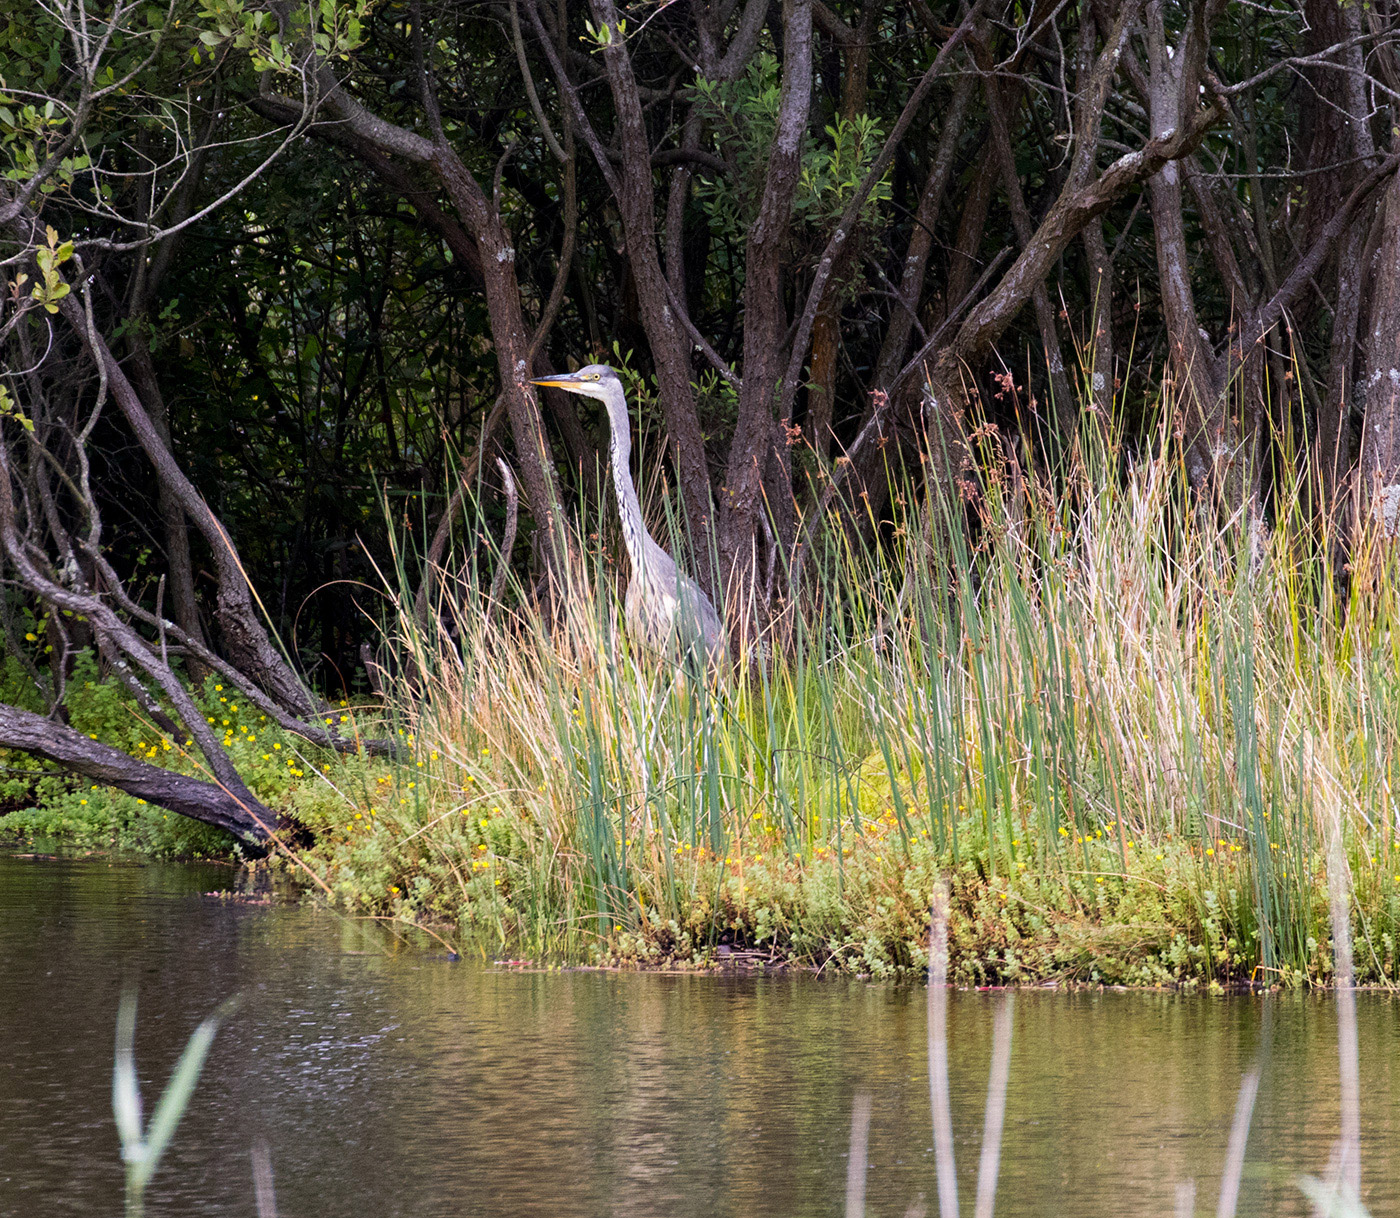 A heron in the reeds